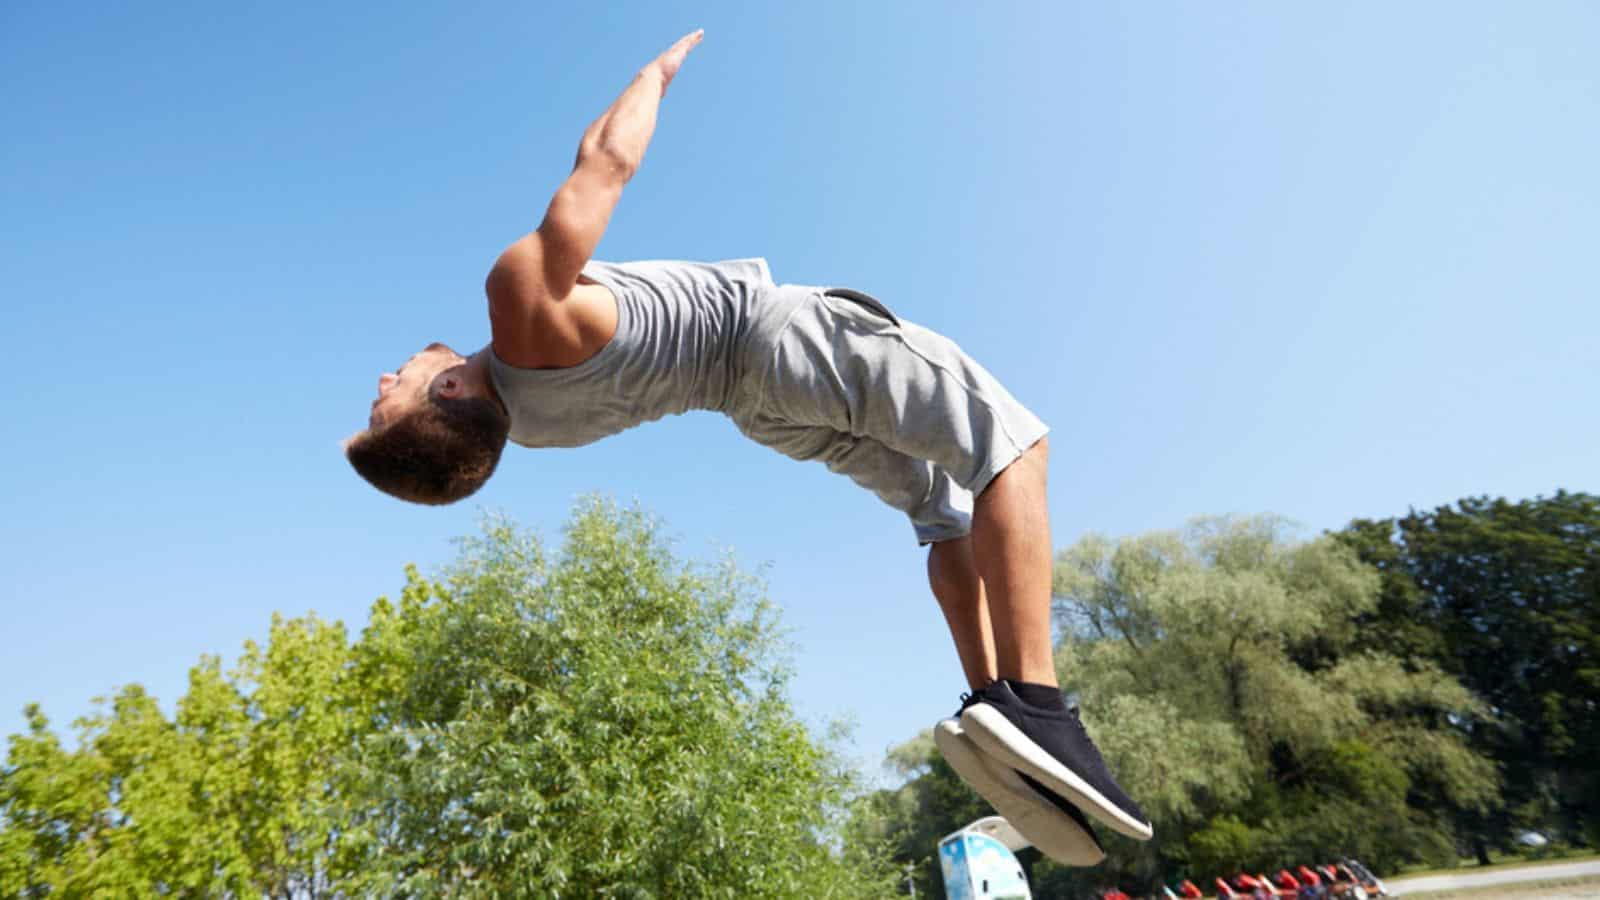 Sporty young man jumping in summer park